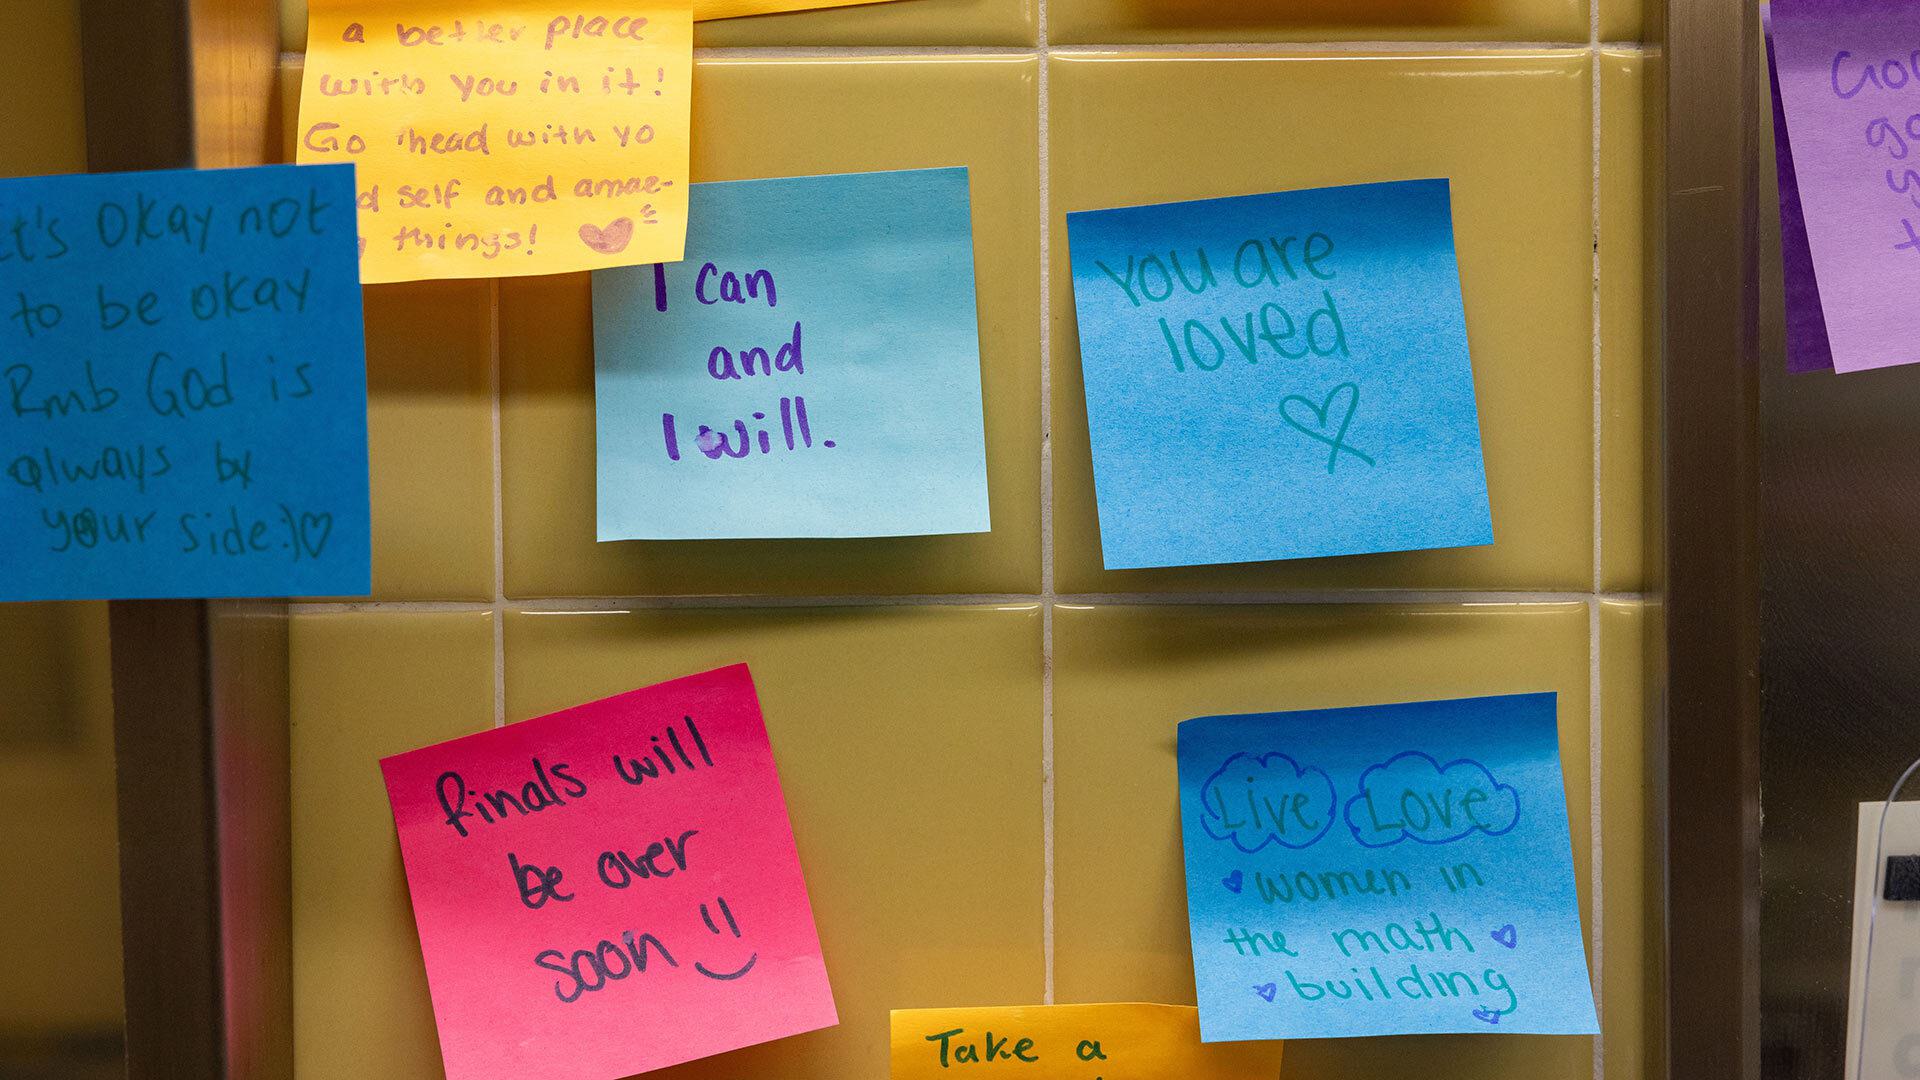 sticky notes that read, "I can and I will," "finals will be over soon," "you are loved," live love women in the math building"